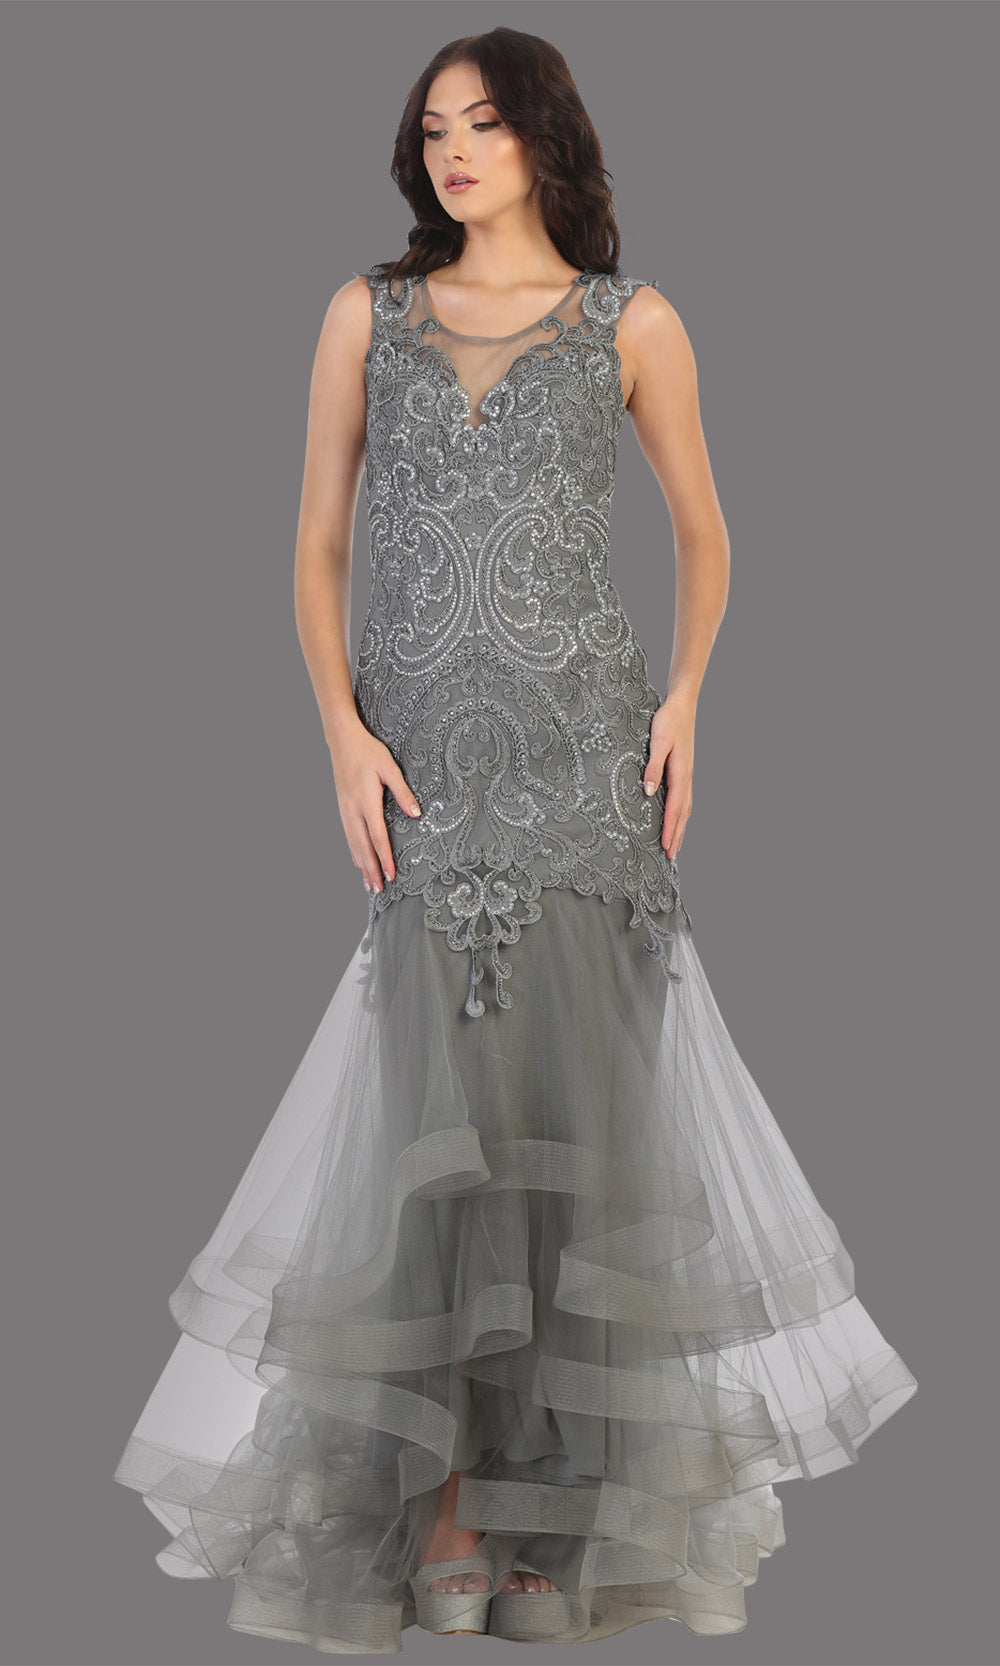 Mayqueen RQ7778 long silver high neck shoulder mermaid sequin dress. Full length gown is perfect for  enagagement/e-shoot dress, formal wedding guest, indowestern gown, evening party dress, prom, bridesmaid. Plus sizes avail.jpg